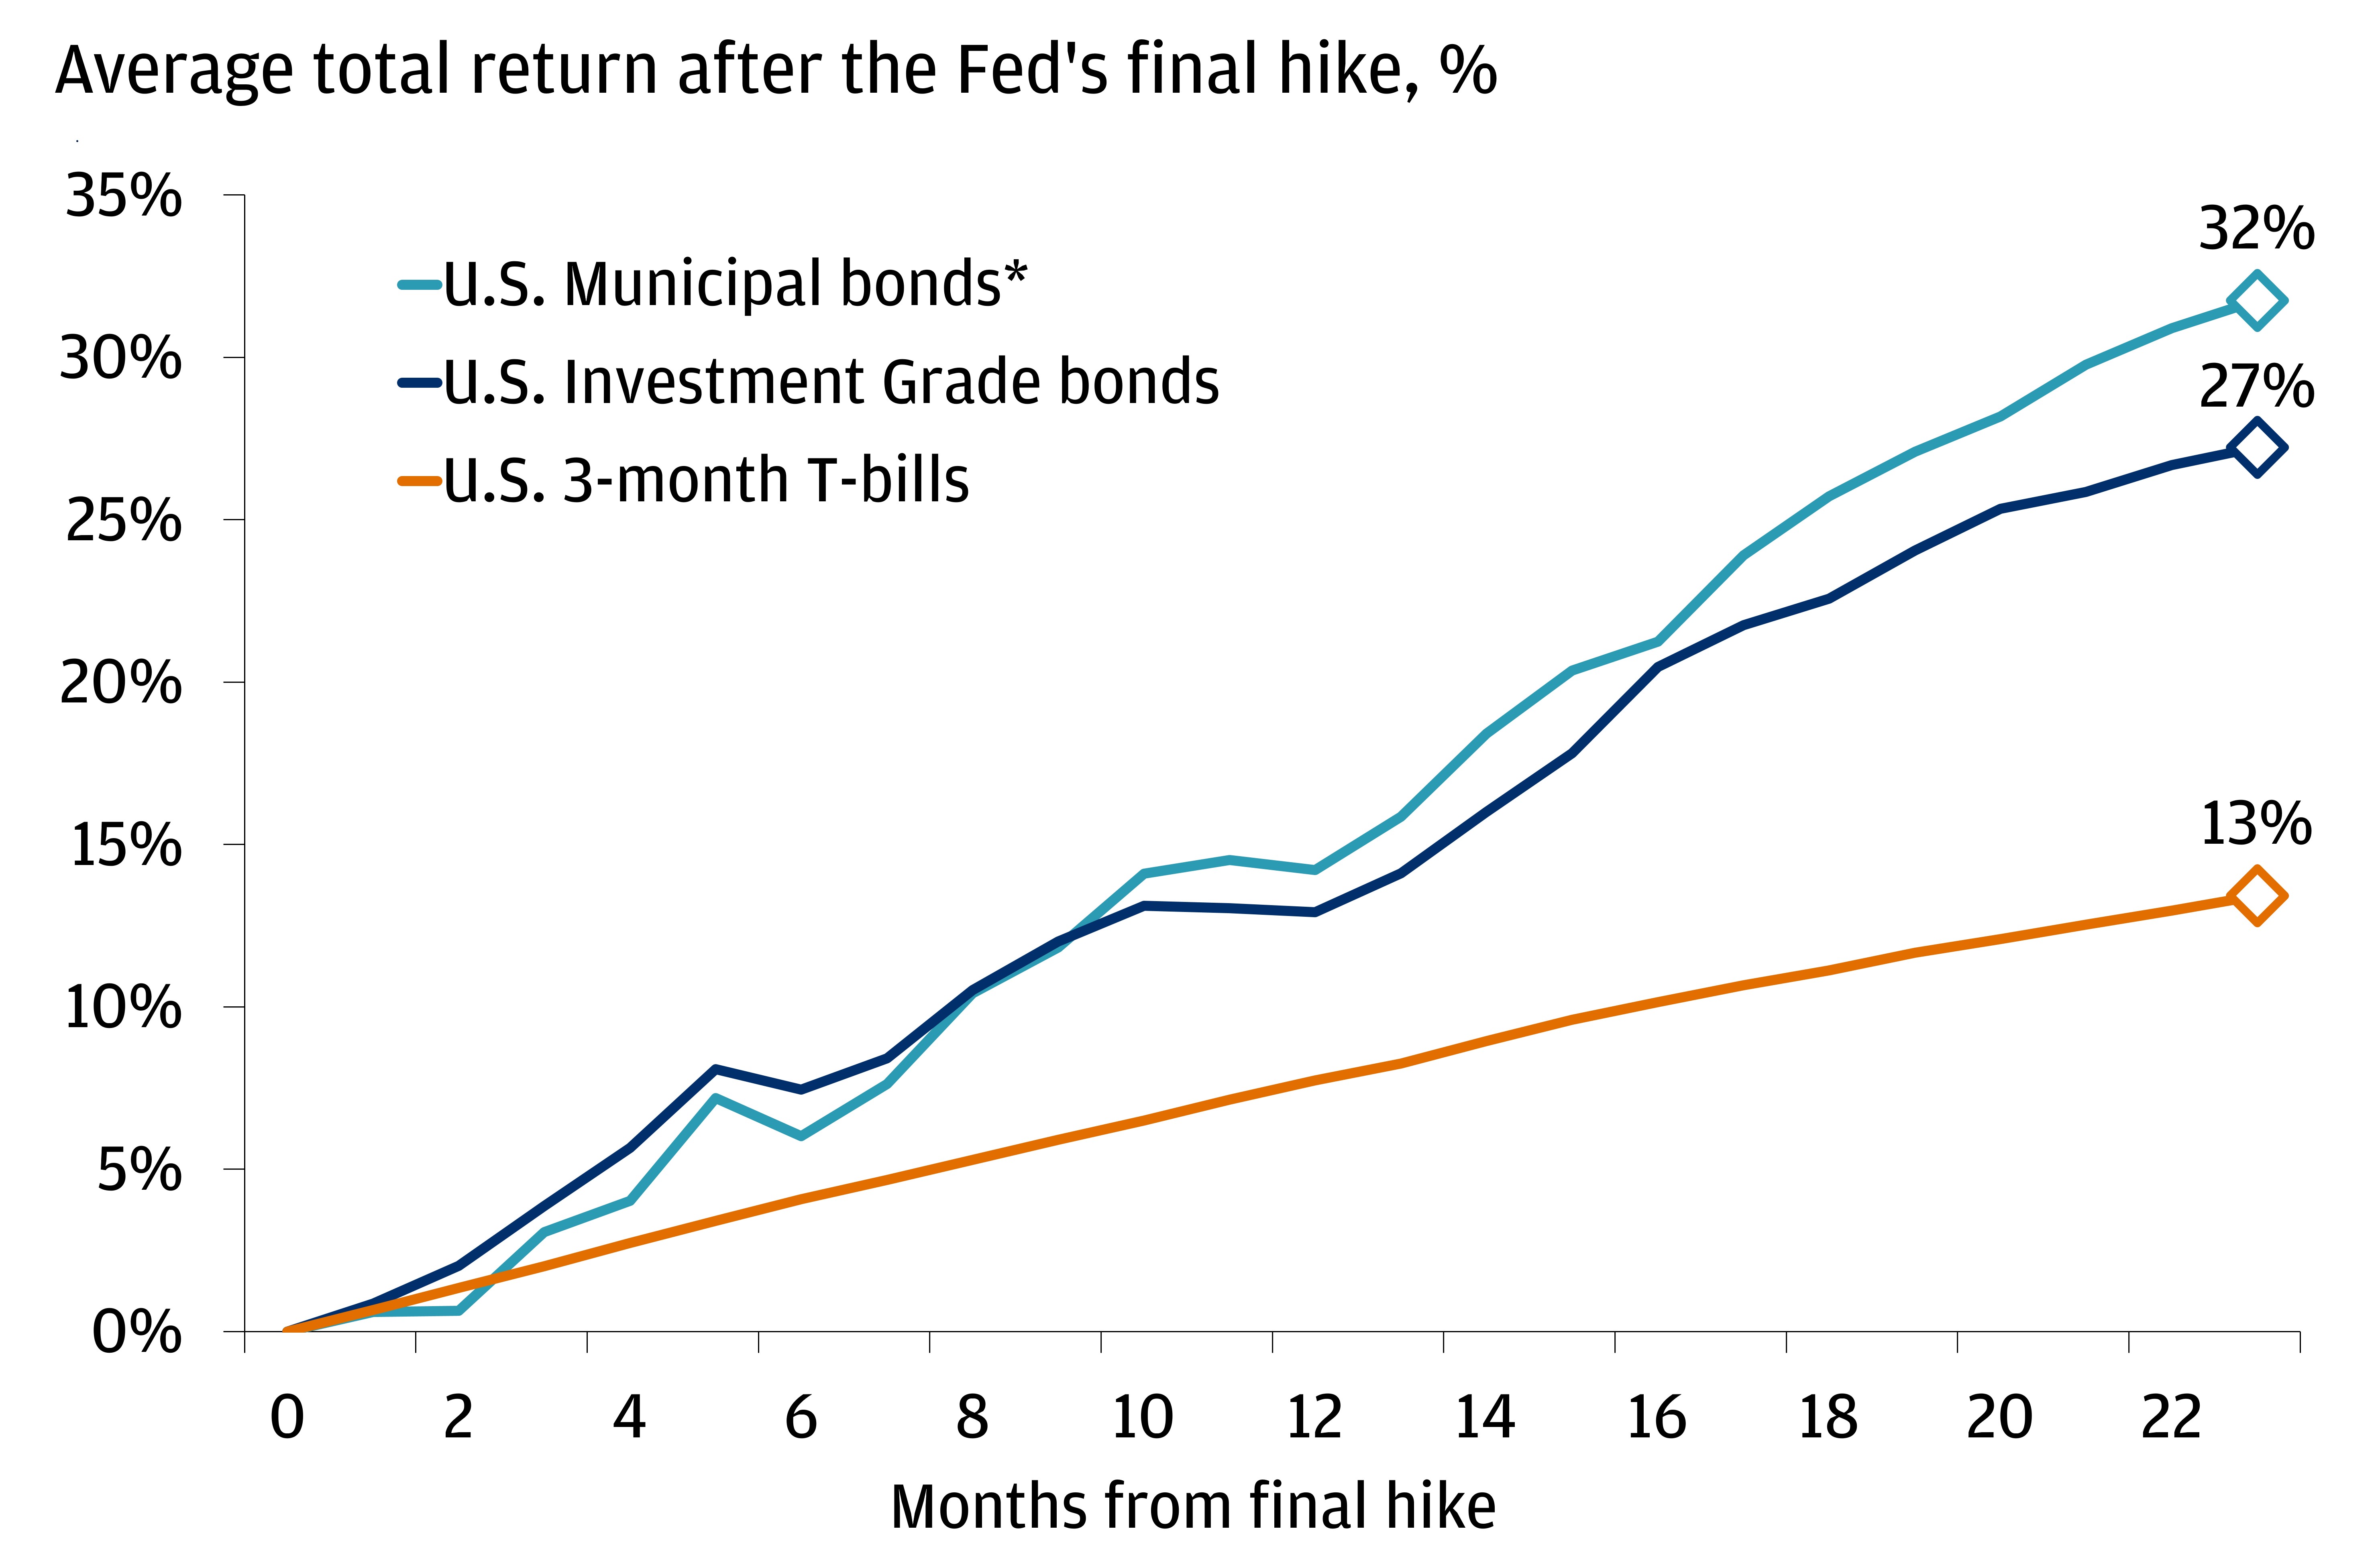 This chart describes the average % total return after the Fed’s final hike for U.S. Municipal bonds, U.S. Investment Grade bonds, and U.S. 3-month T-bills.